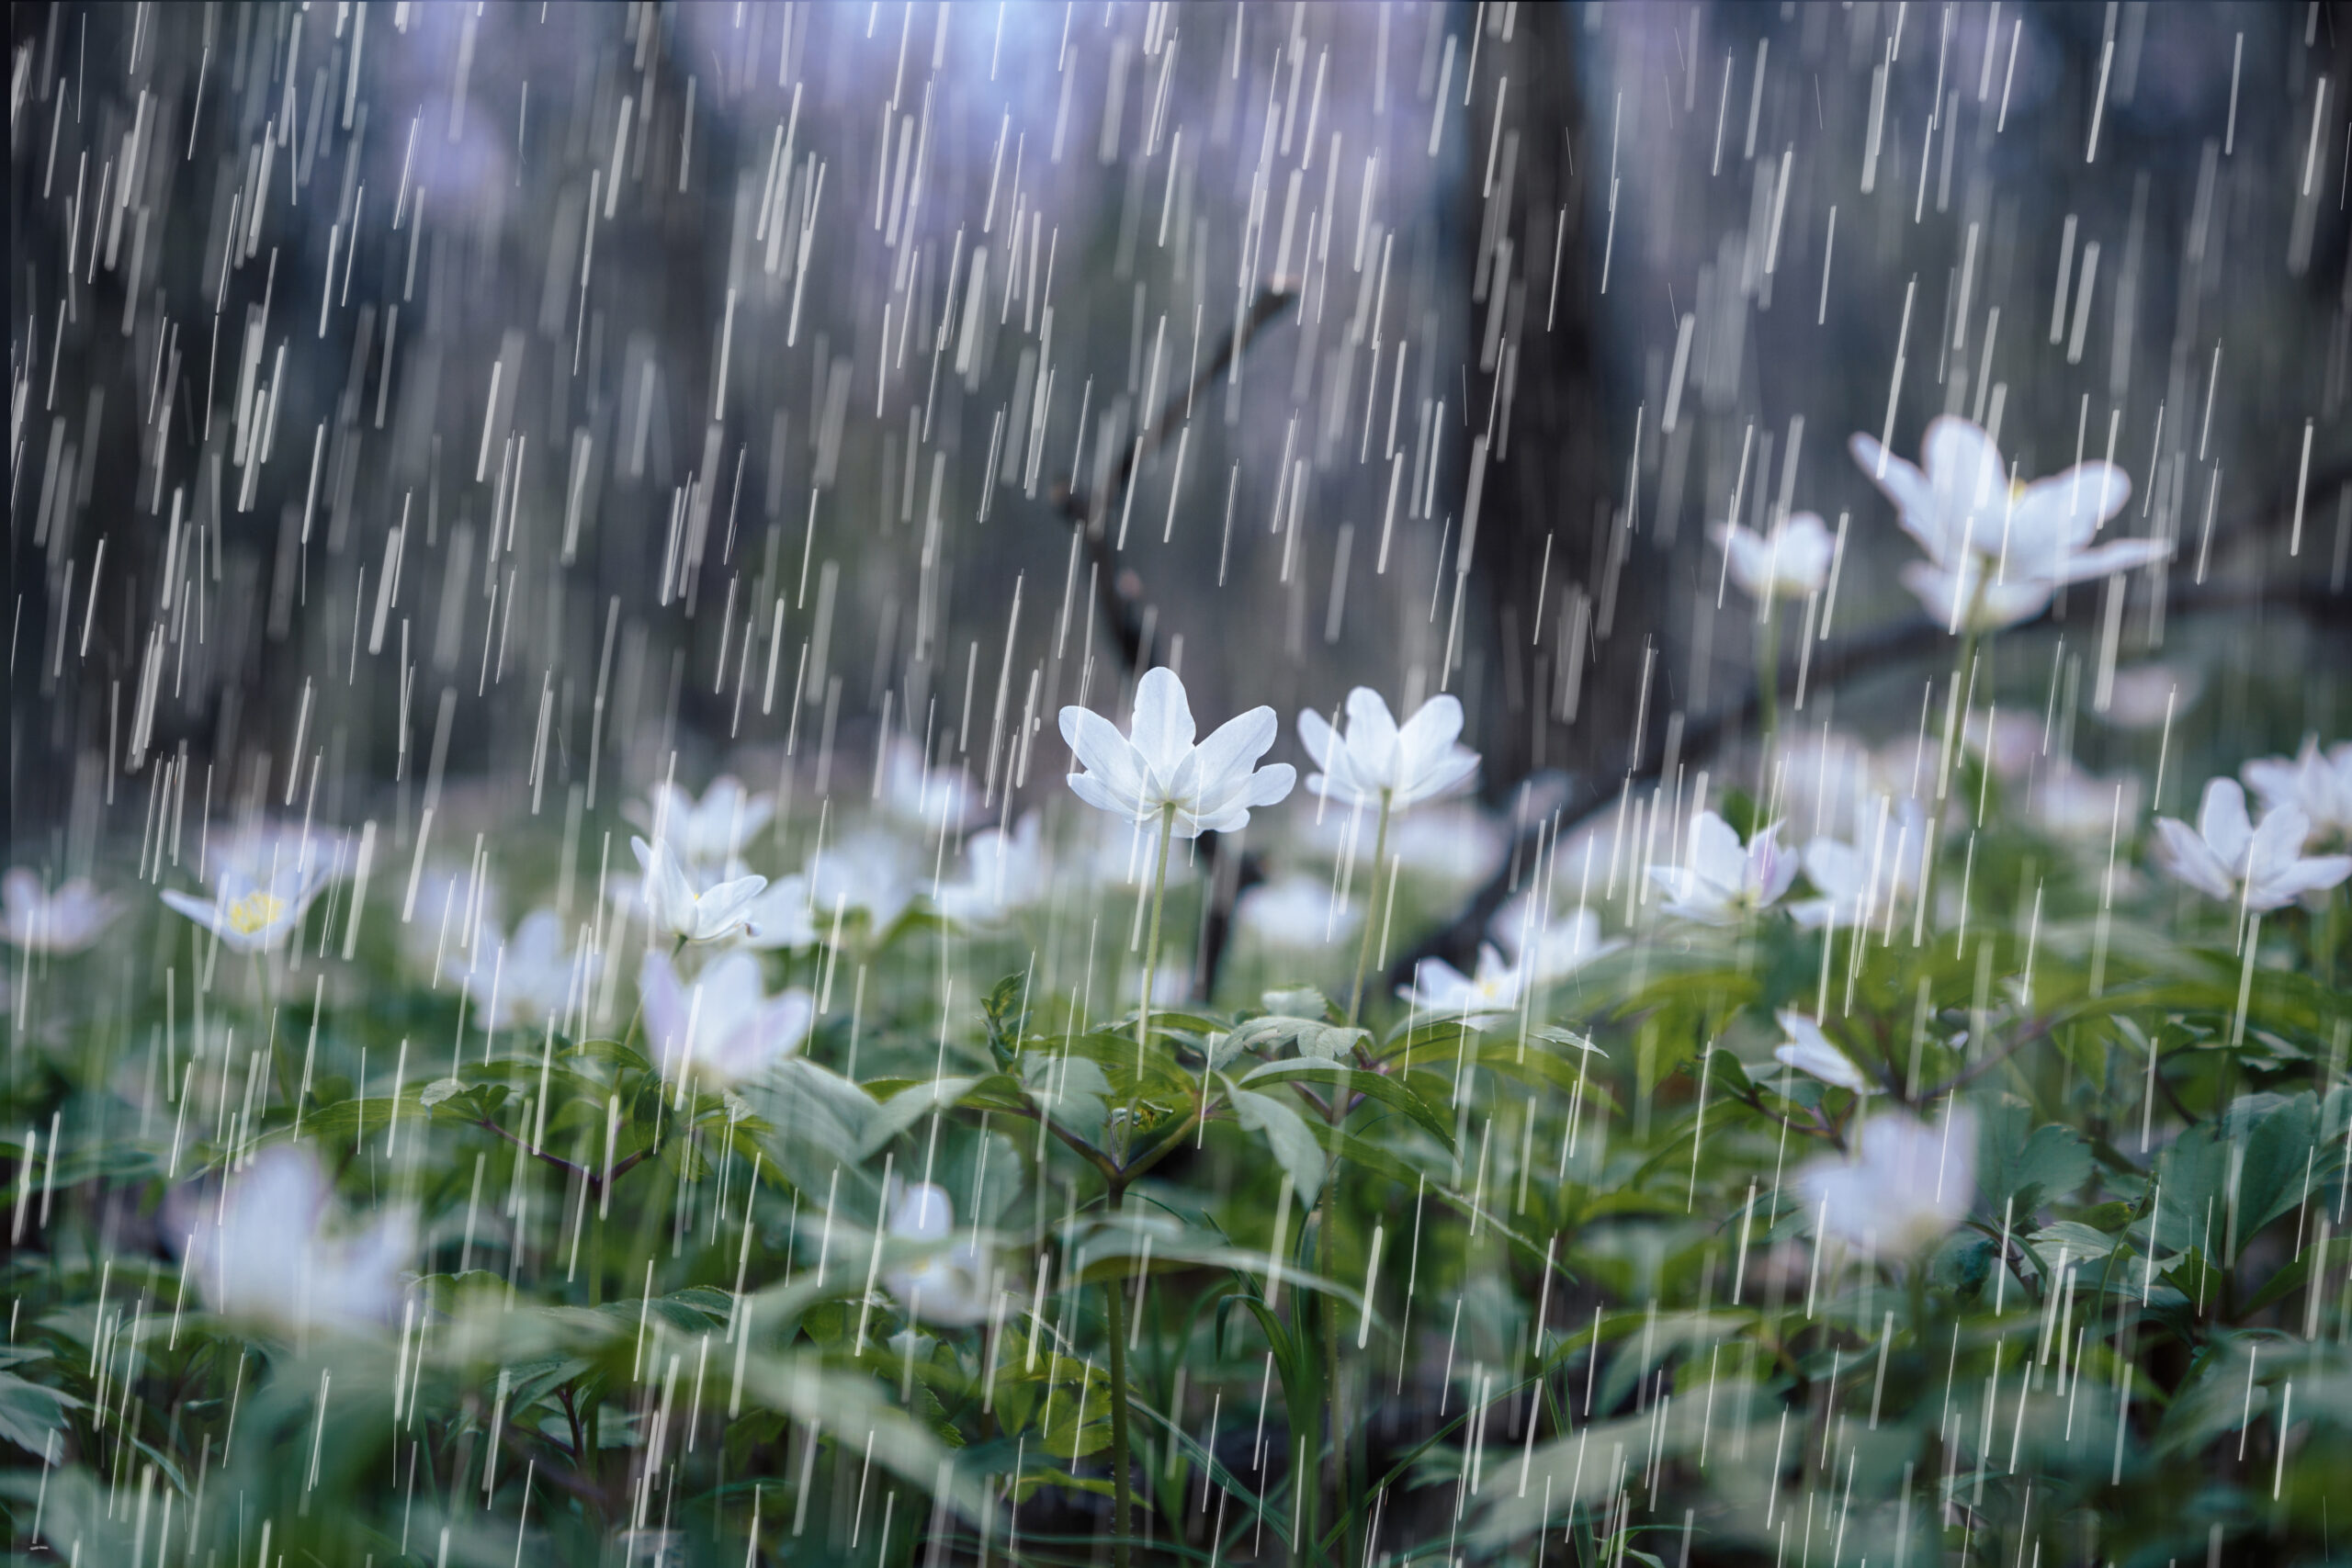 April Showers Bring May Flowers - contact Dodds today at 937-372-4408